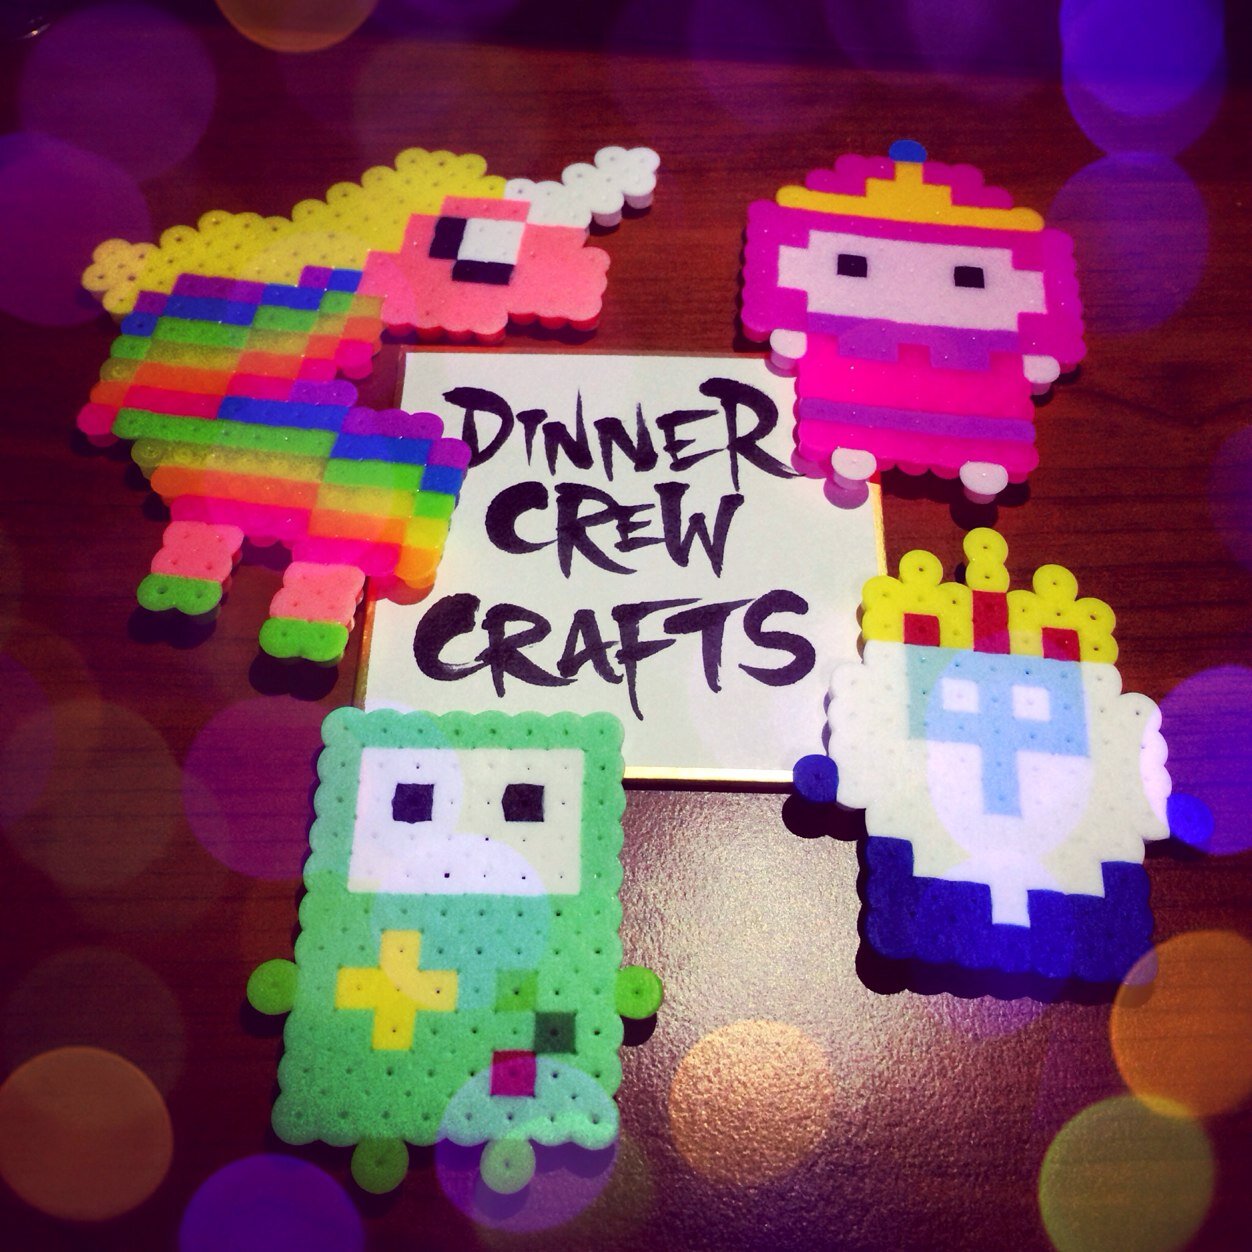 Hawaii based group of friends who love to eat and craft! Check our IG @dinnercrewcrafts #dinnercrewcrafts